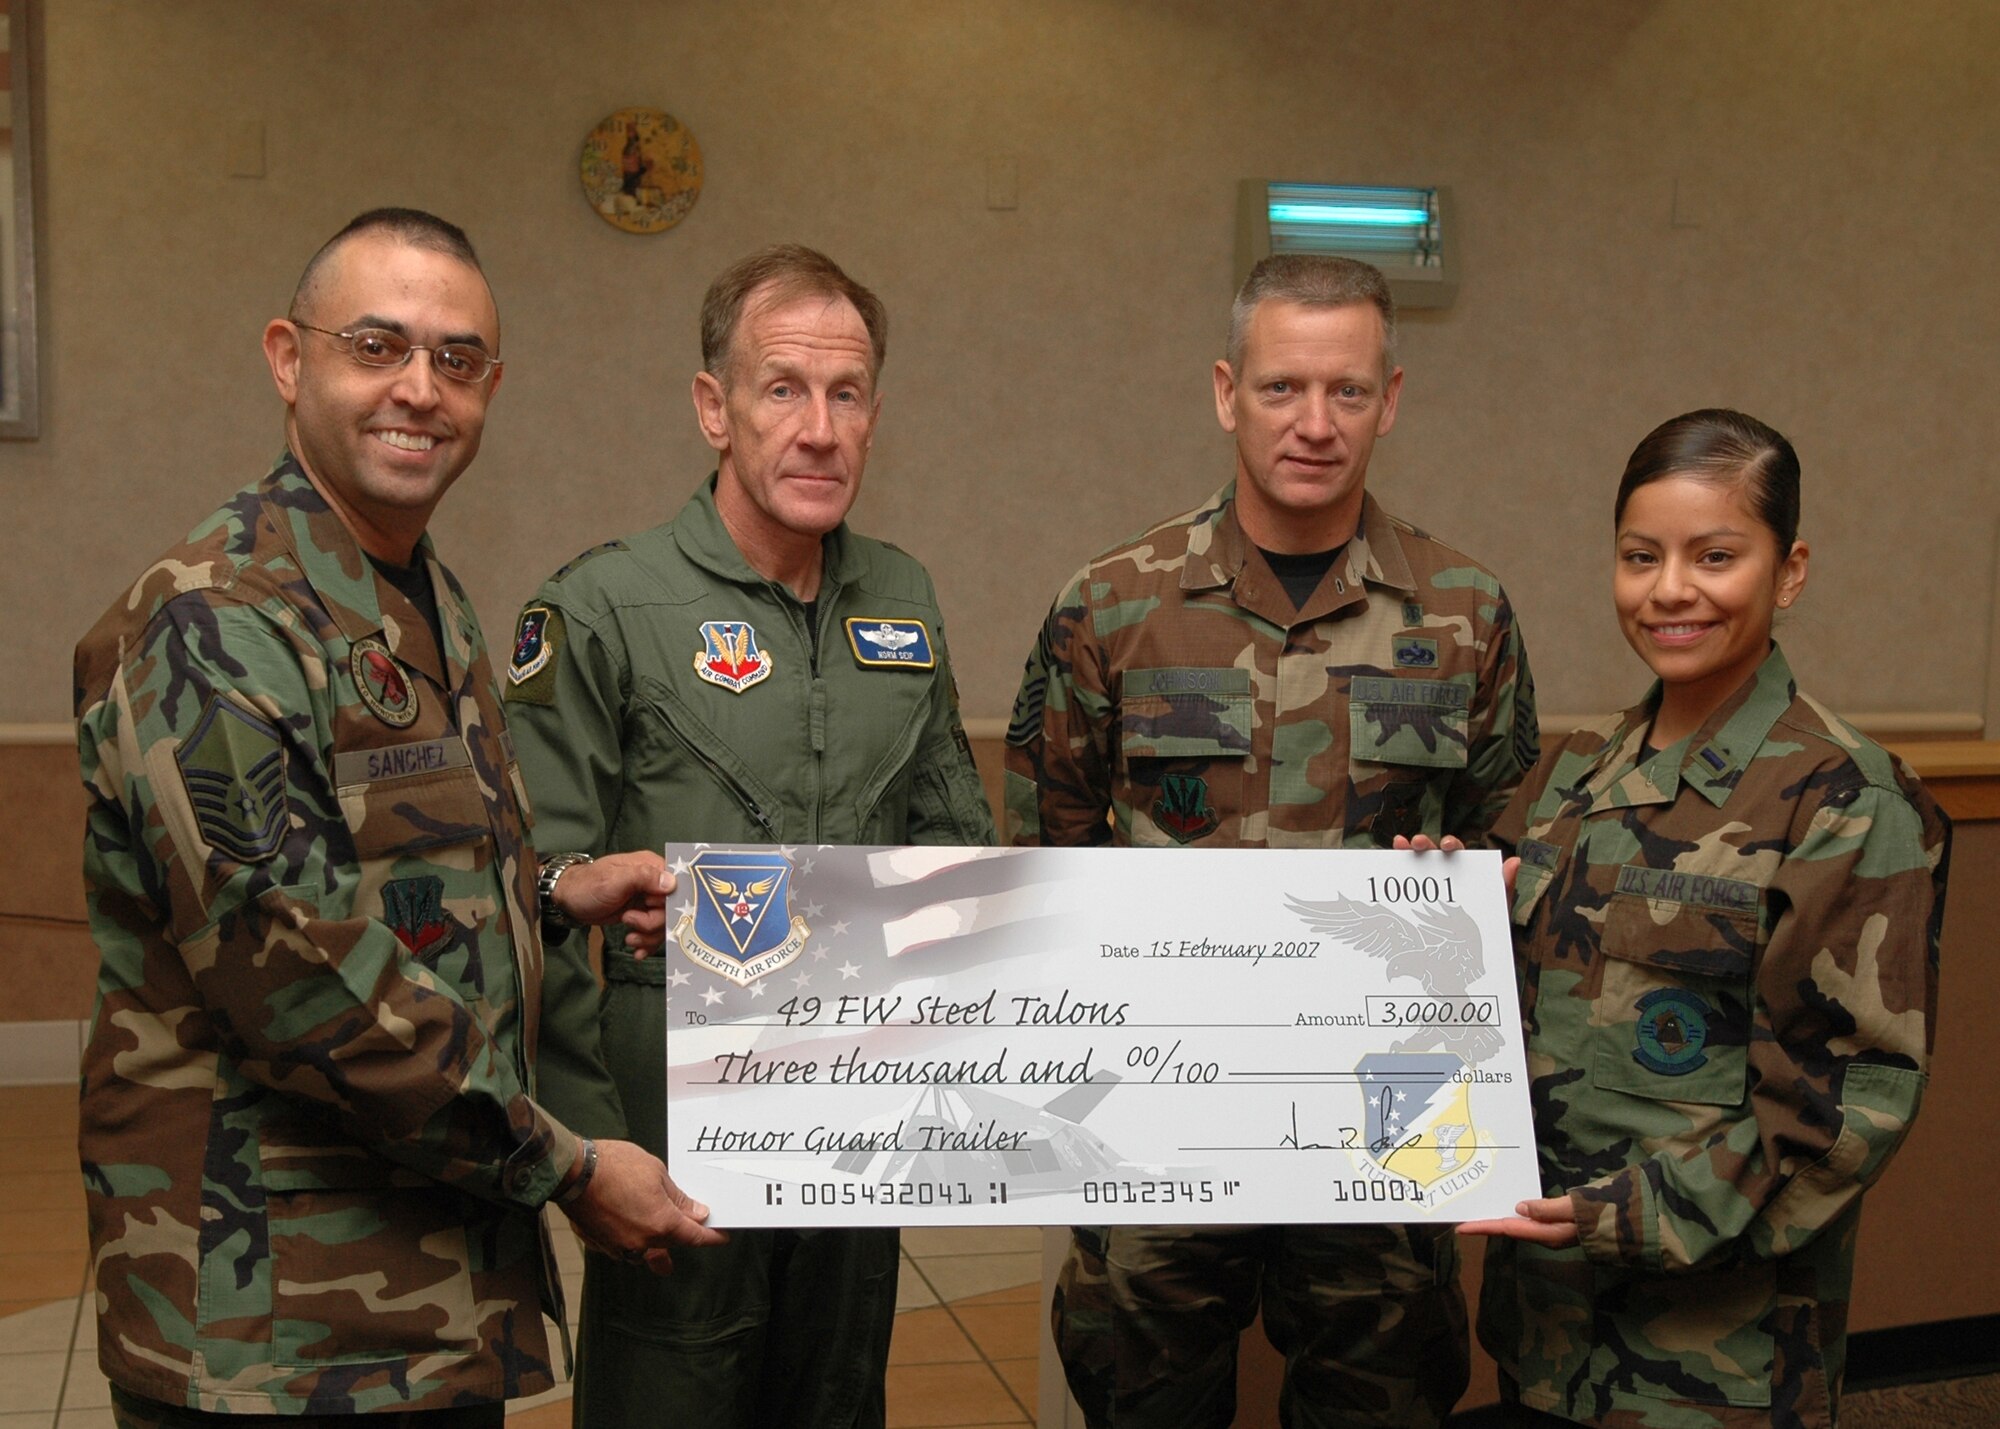 Lt. Gen. Norman Seip, 12th Air Force commander, presented the Holloman Steel Talons Honor Guard with a check for a trailer during the breakfast he had with the Steel Talons Feb. 15. (U.S. Air Force photo by Airman Jamal Sutter)